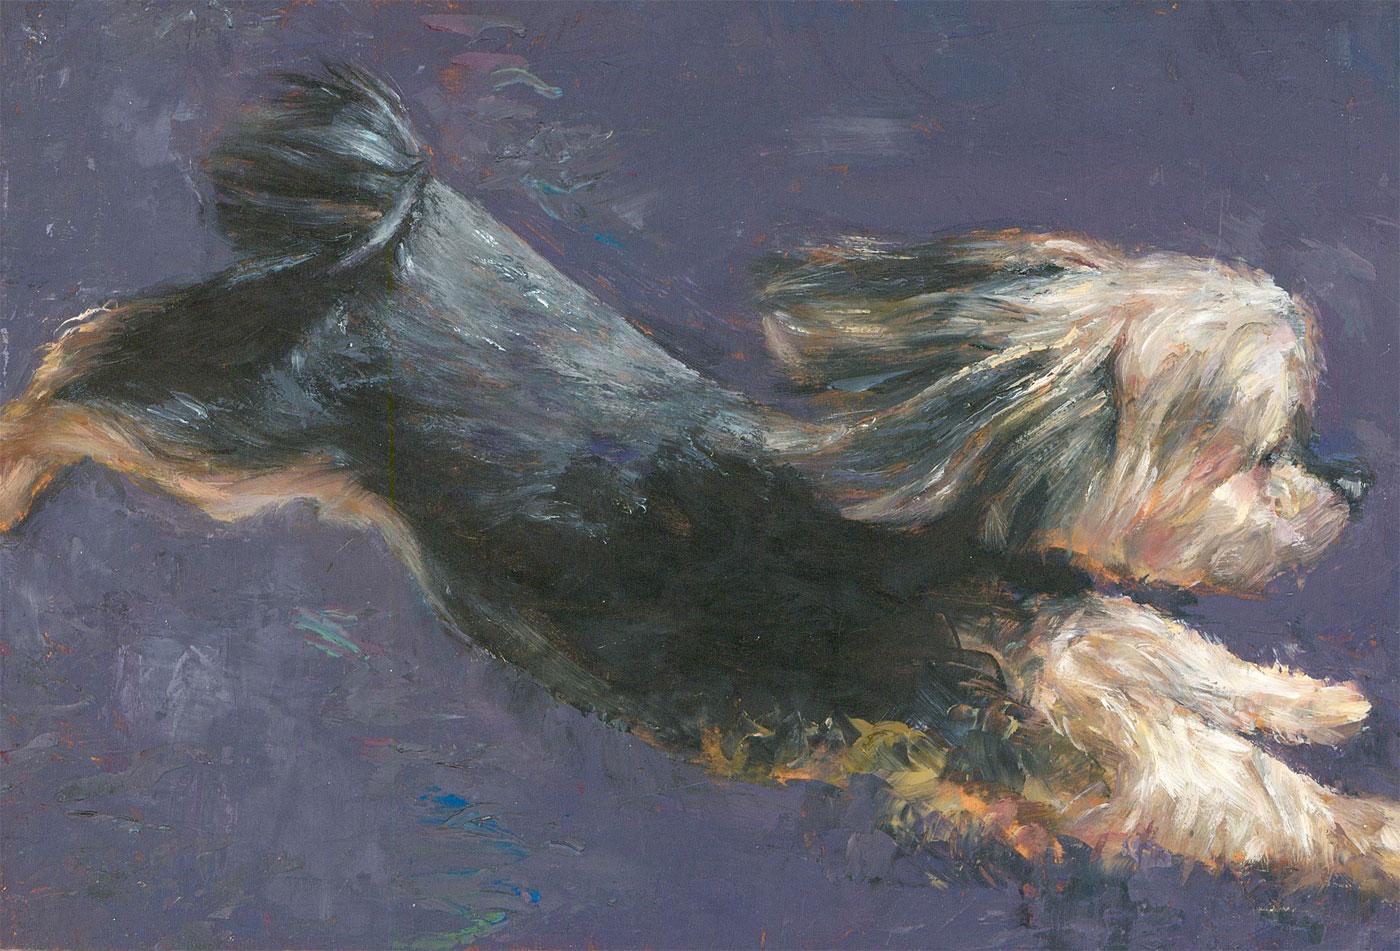 Animal Painting Unknown - Huile contemporaine - Chase Contemporary